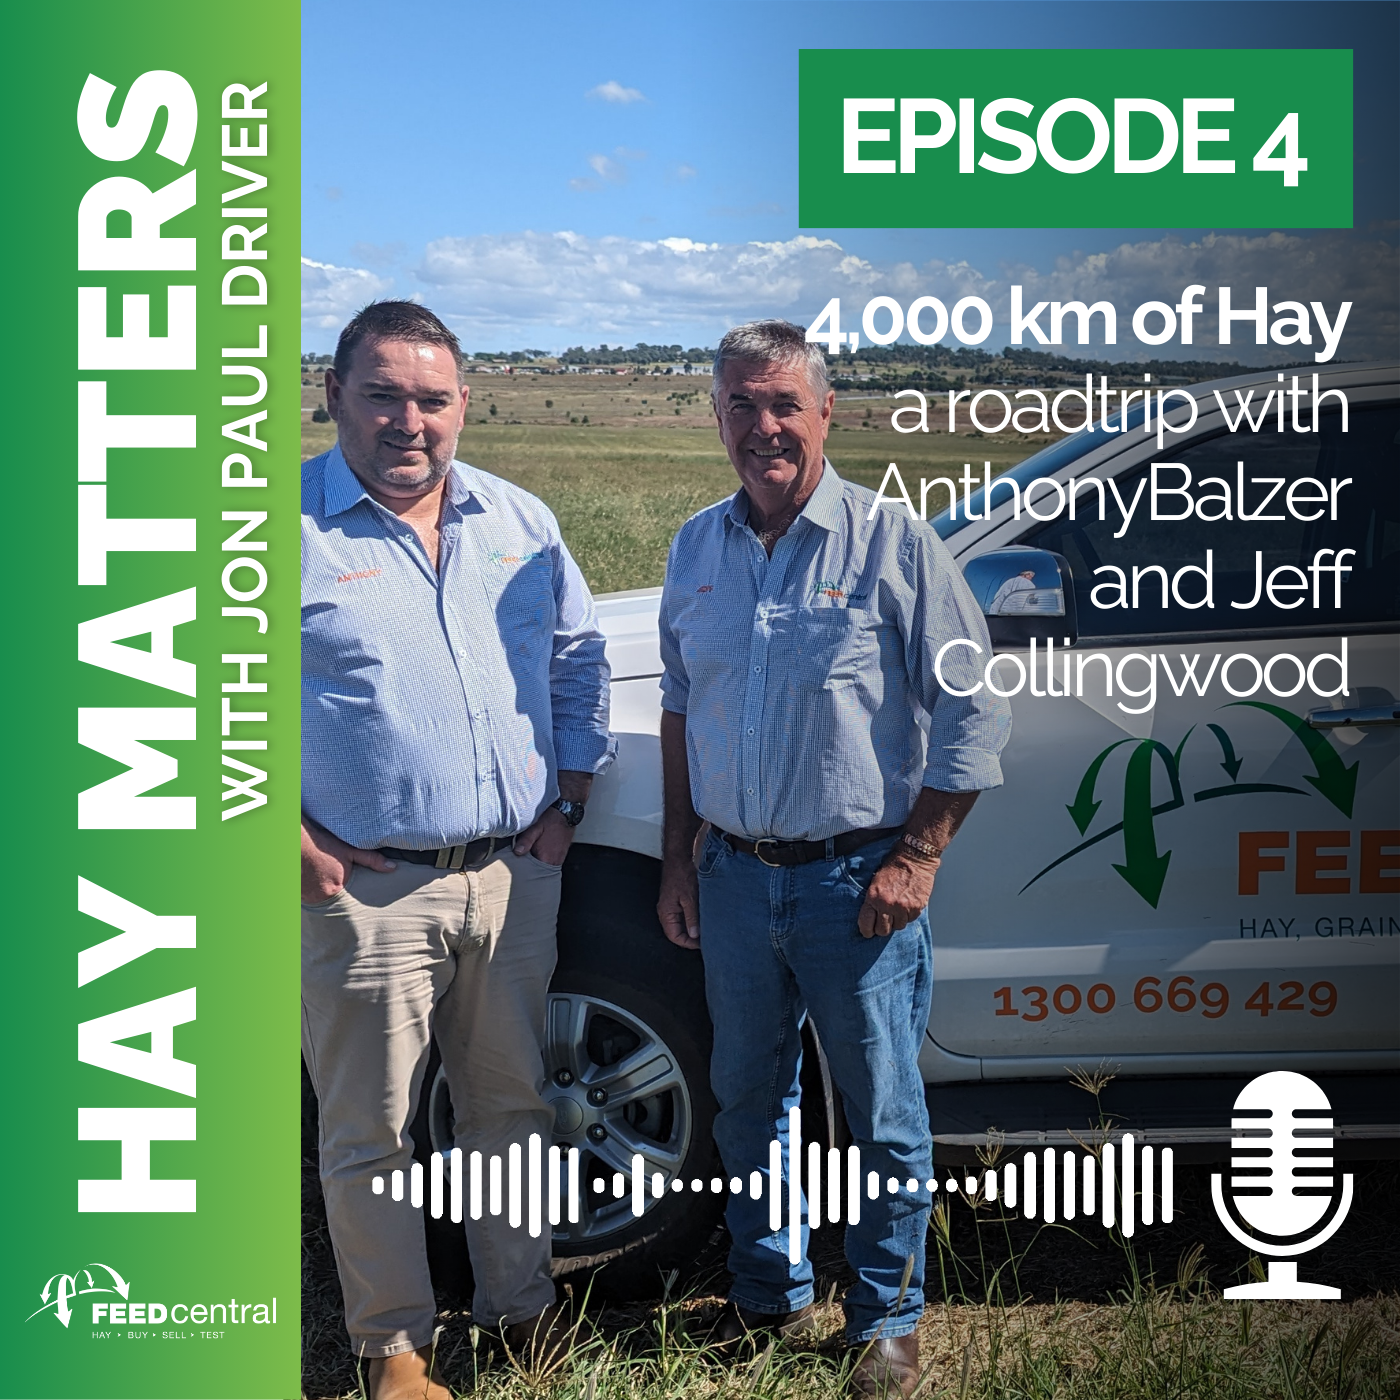 4,000 km of Hay: a roadtrip with Anthony Balzer and Jeff Collingwood